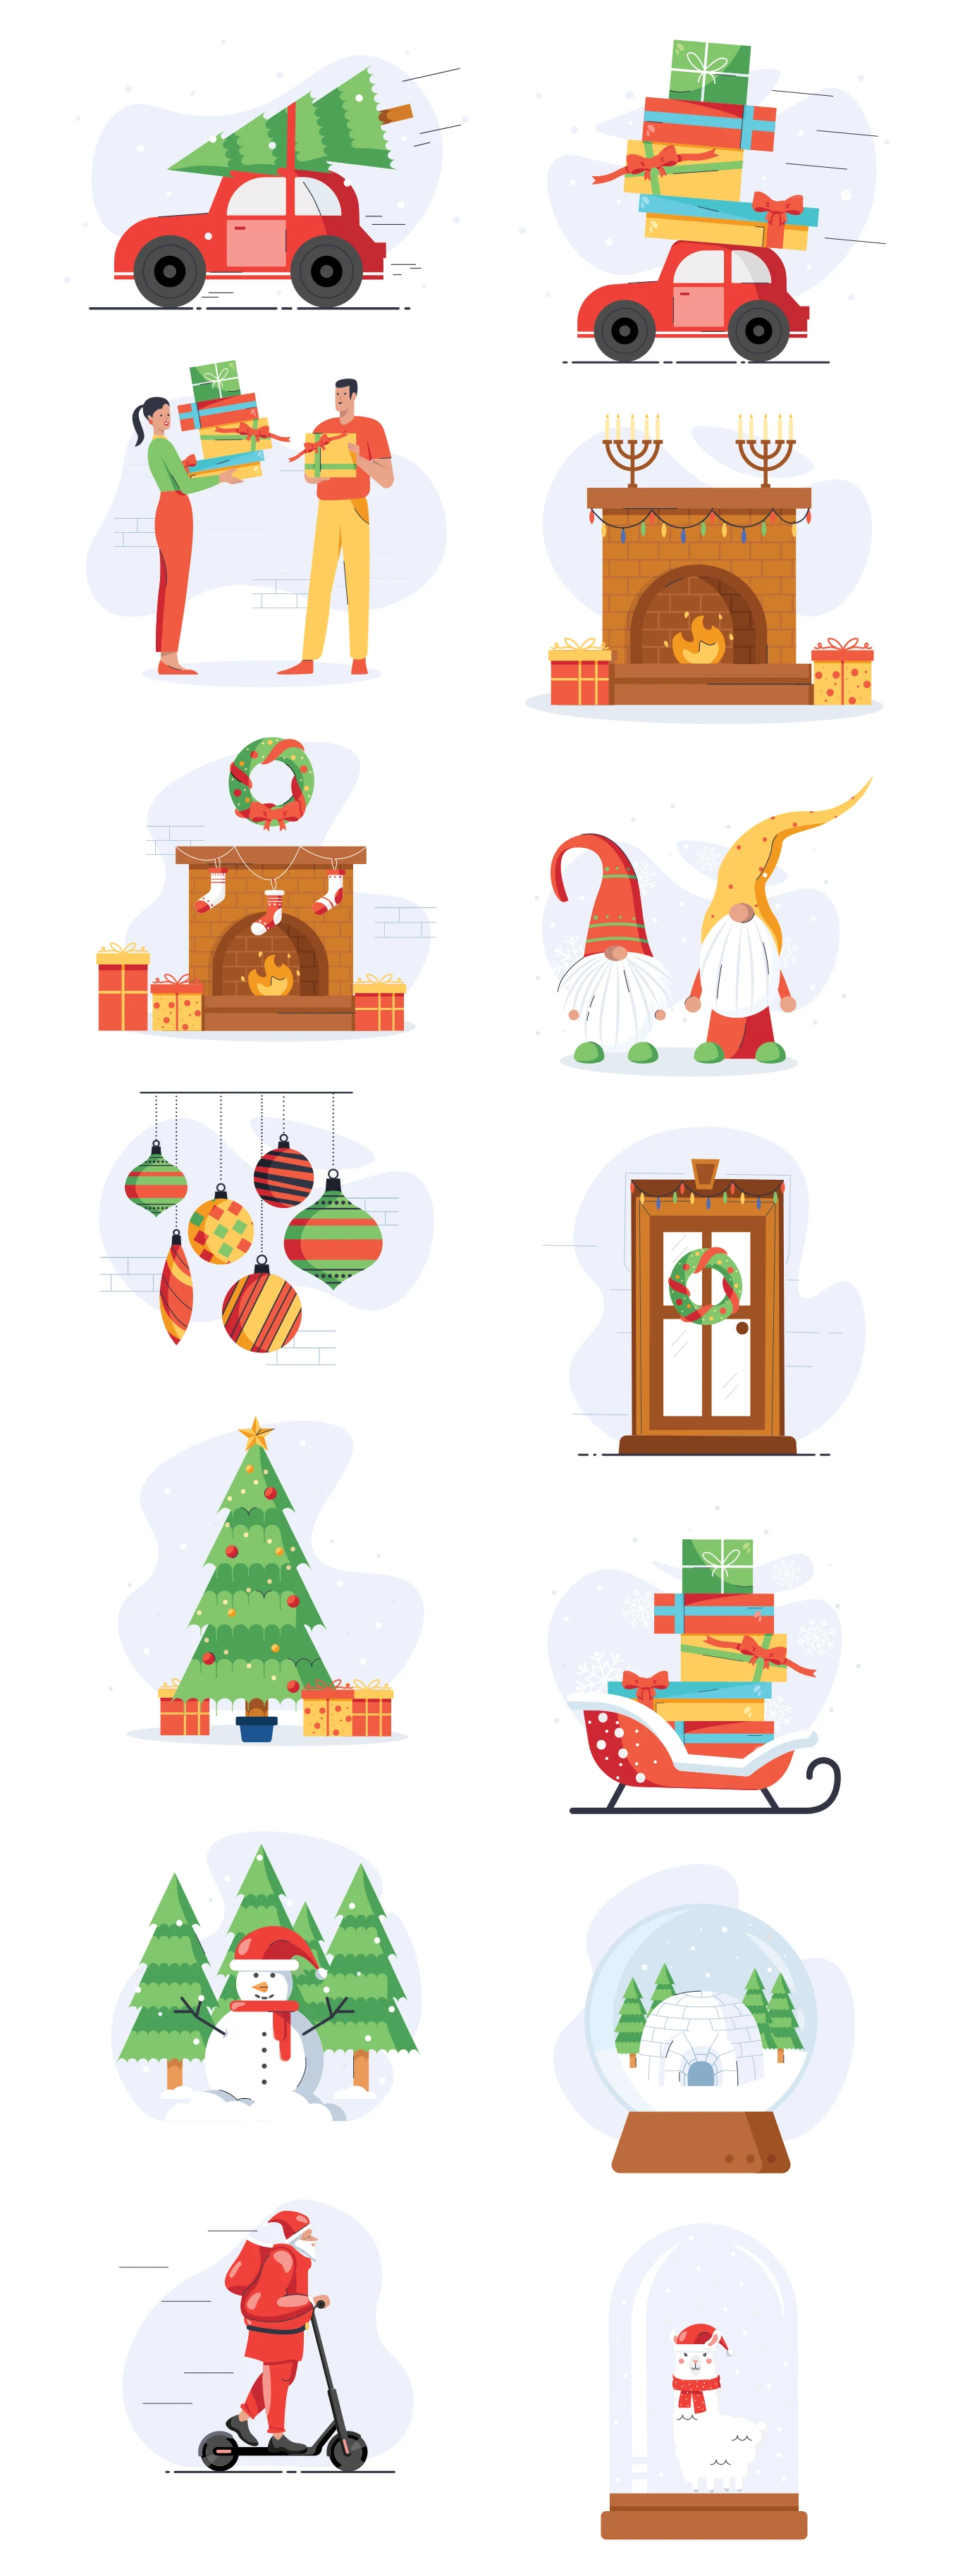 Christmas Free Illustration Pack - High-quality Free Christmas royalty-free Illustration pack that can be used in all designing software like Photoshop, Illustrator, Adobe XD and Sketch for Festival & Days related content in all formats.